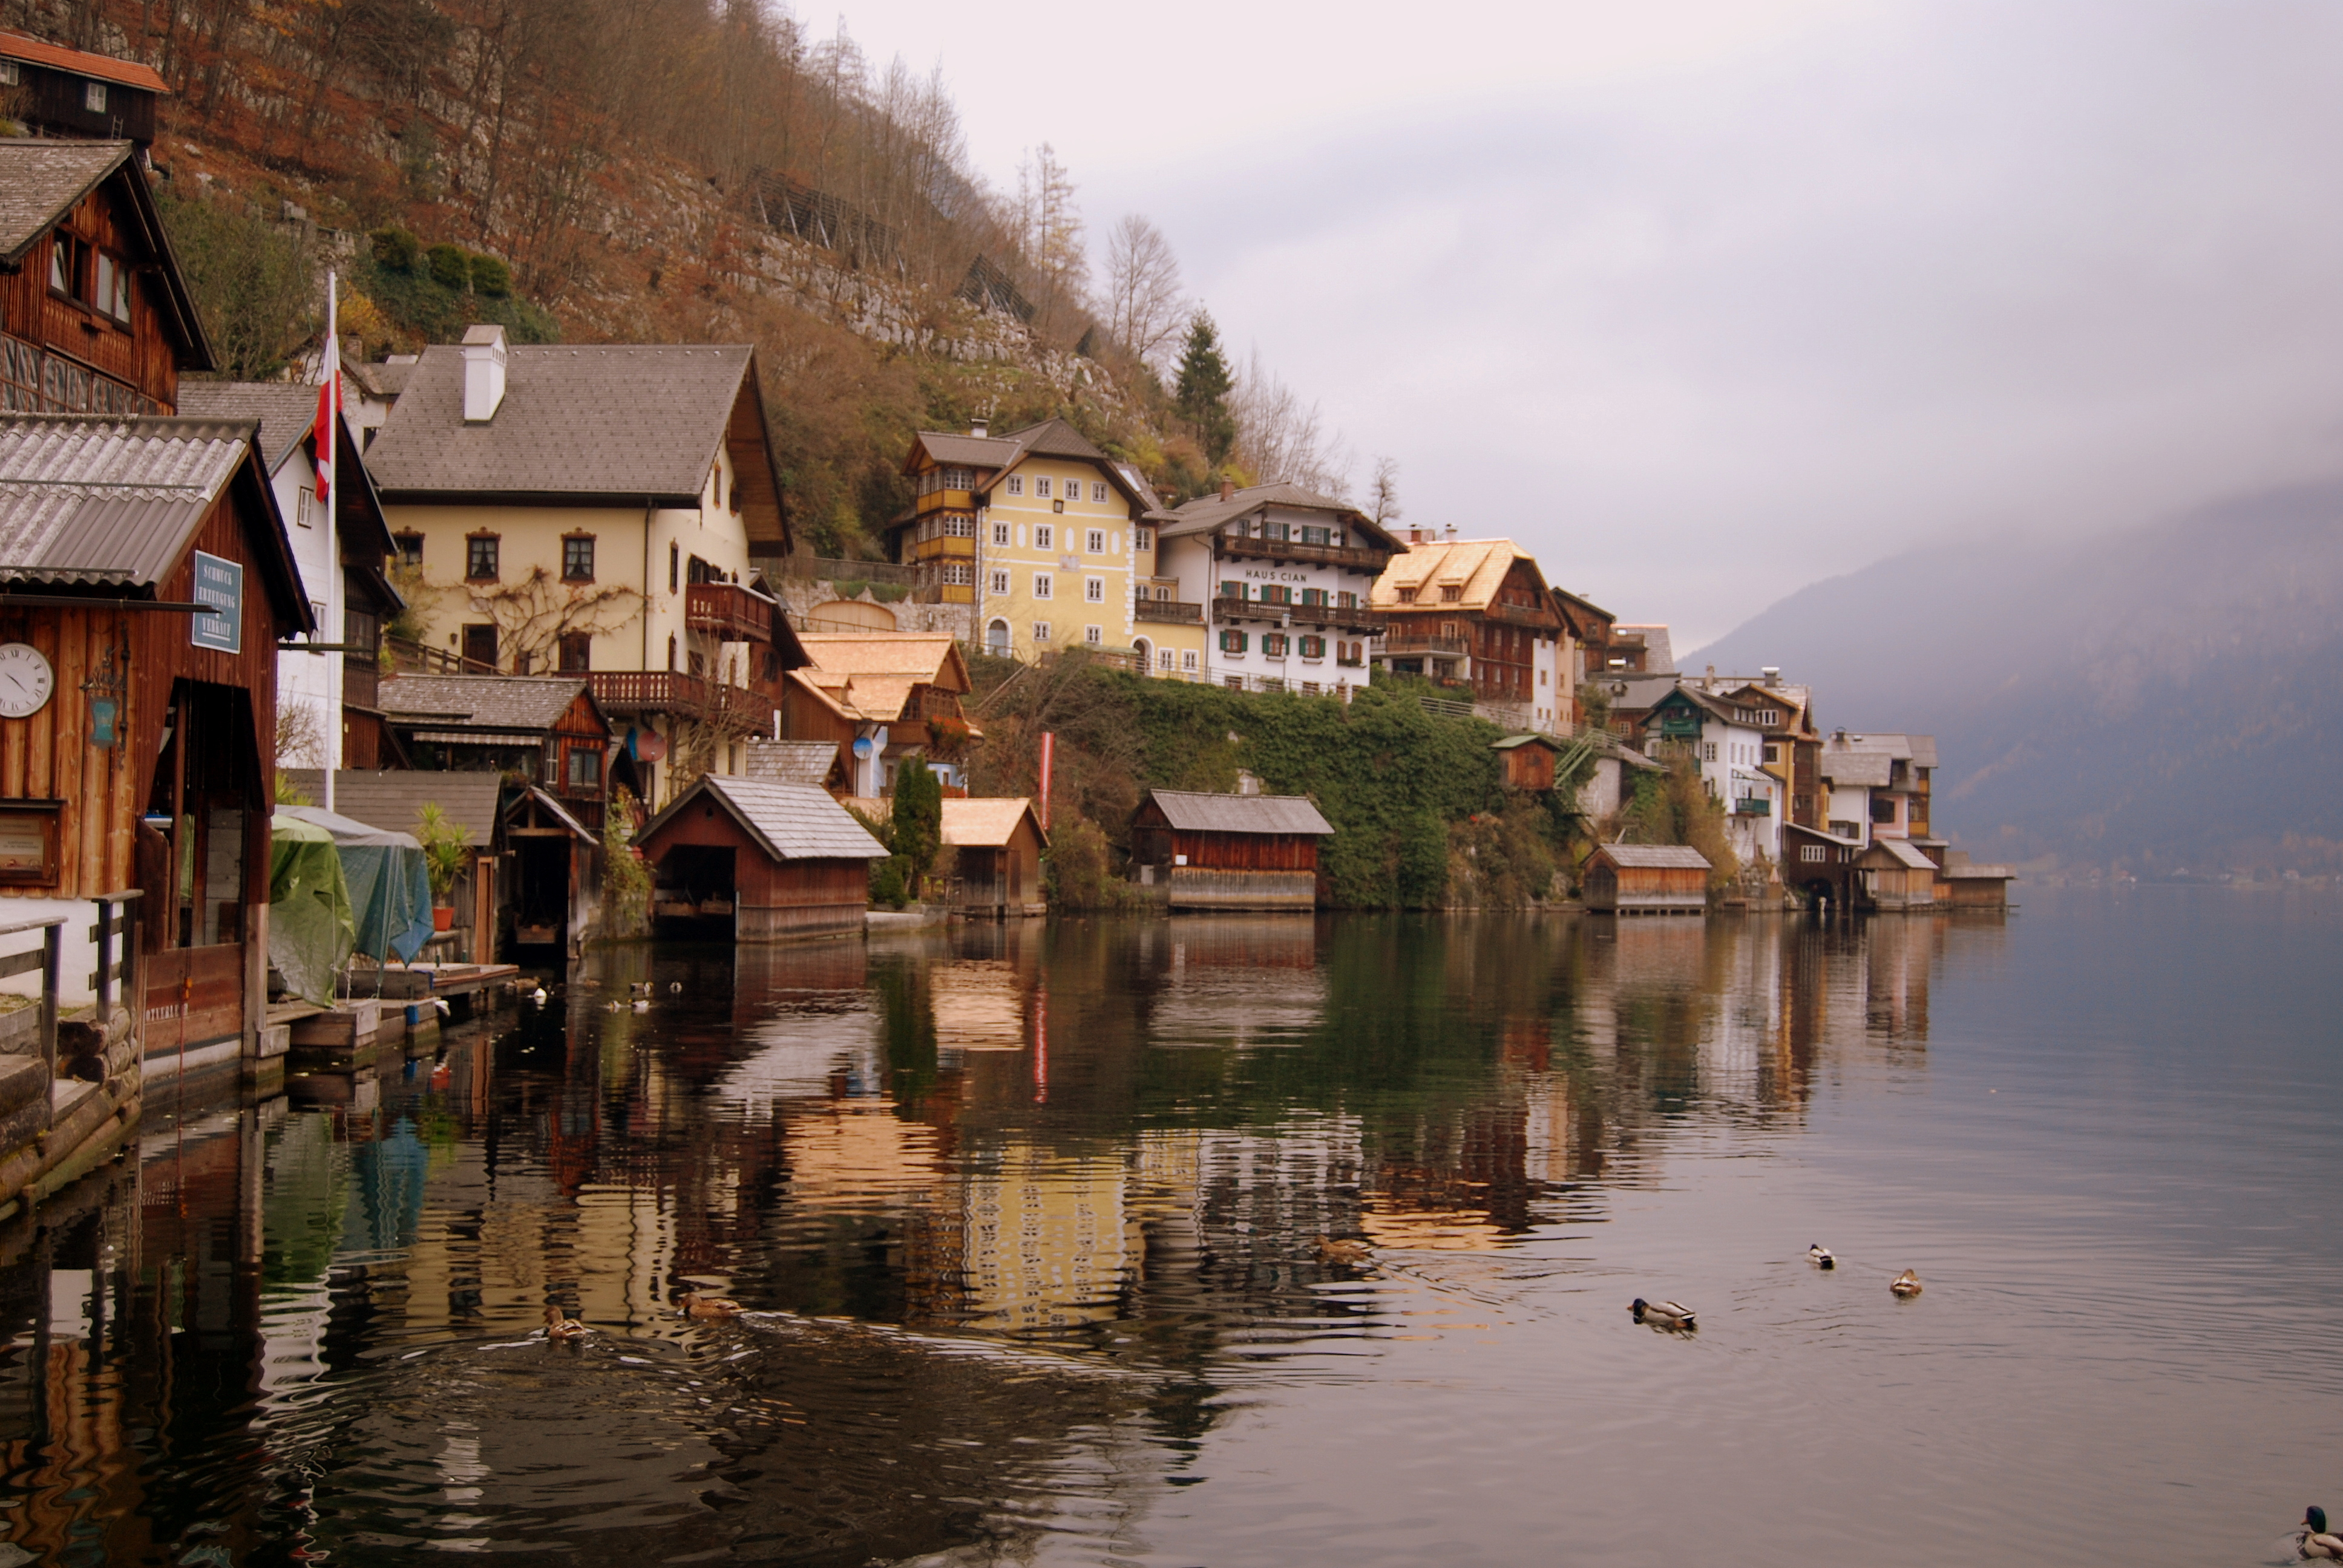 this picture was taken early in the morning at hallstatt, austria on november 12th, 2008.